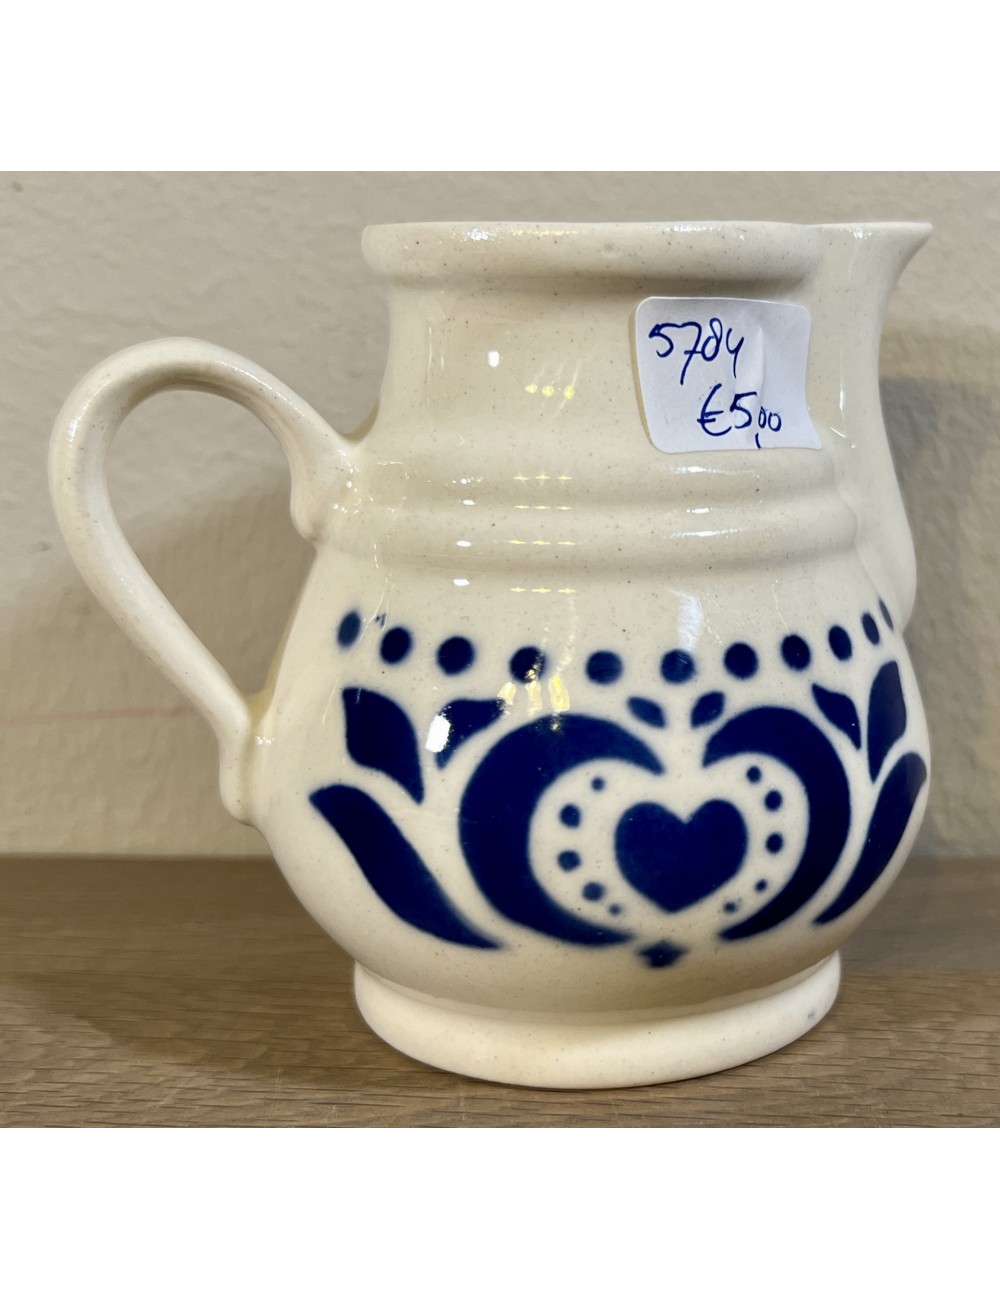 Milk jug - Torgau (Germany) - décor in blue with a heart in the center section